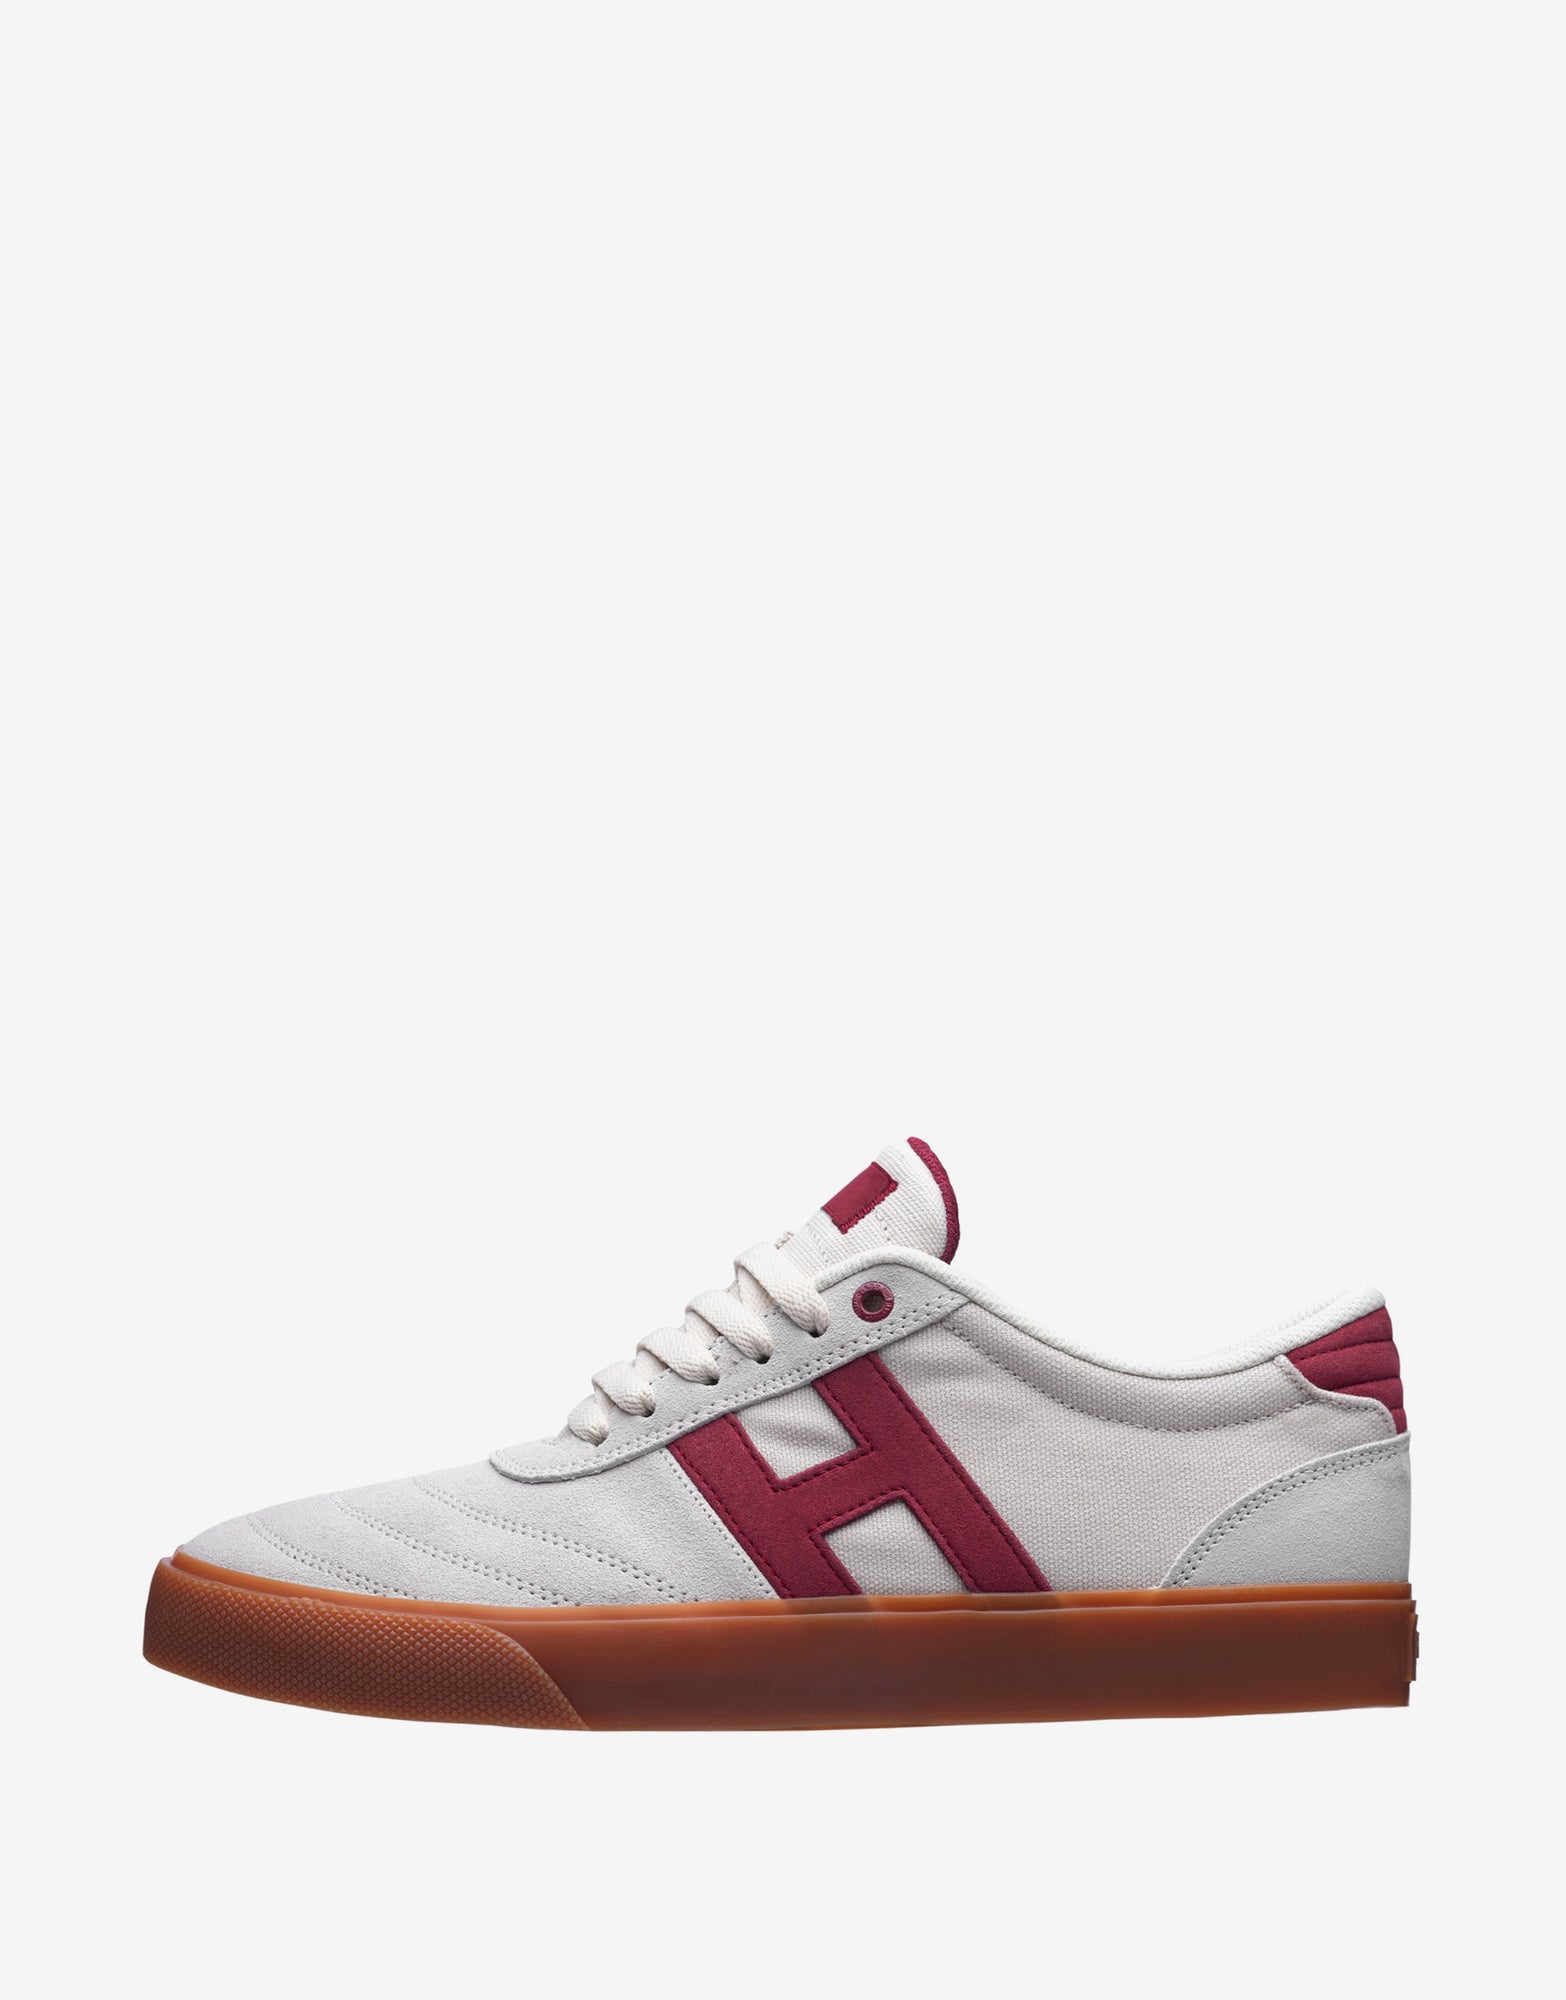 huf shoes out of business